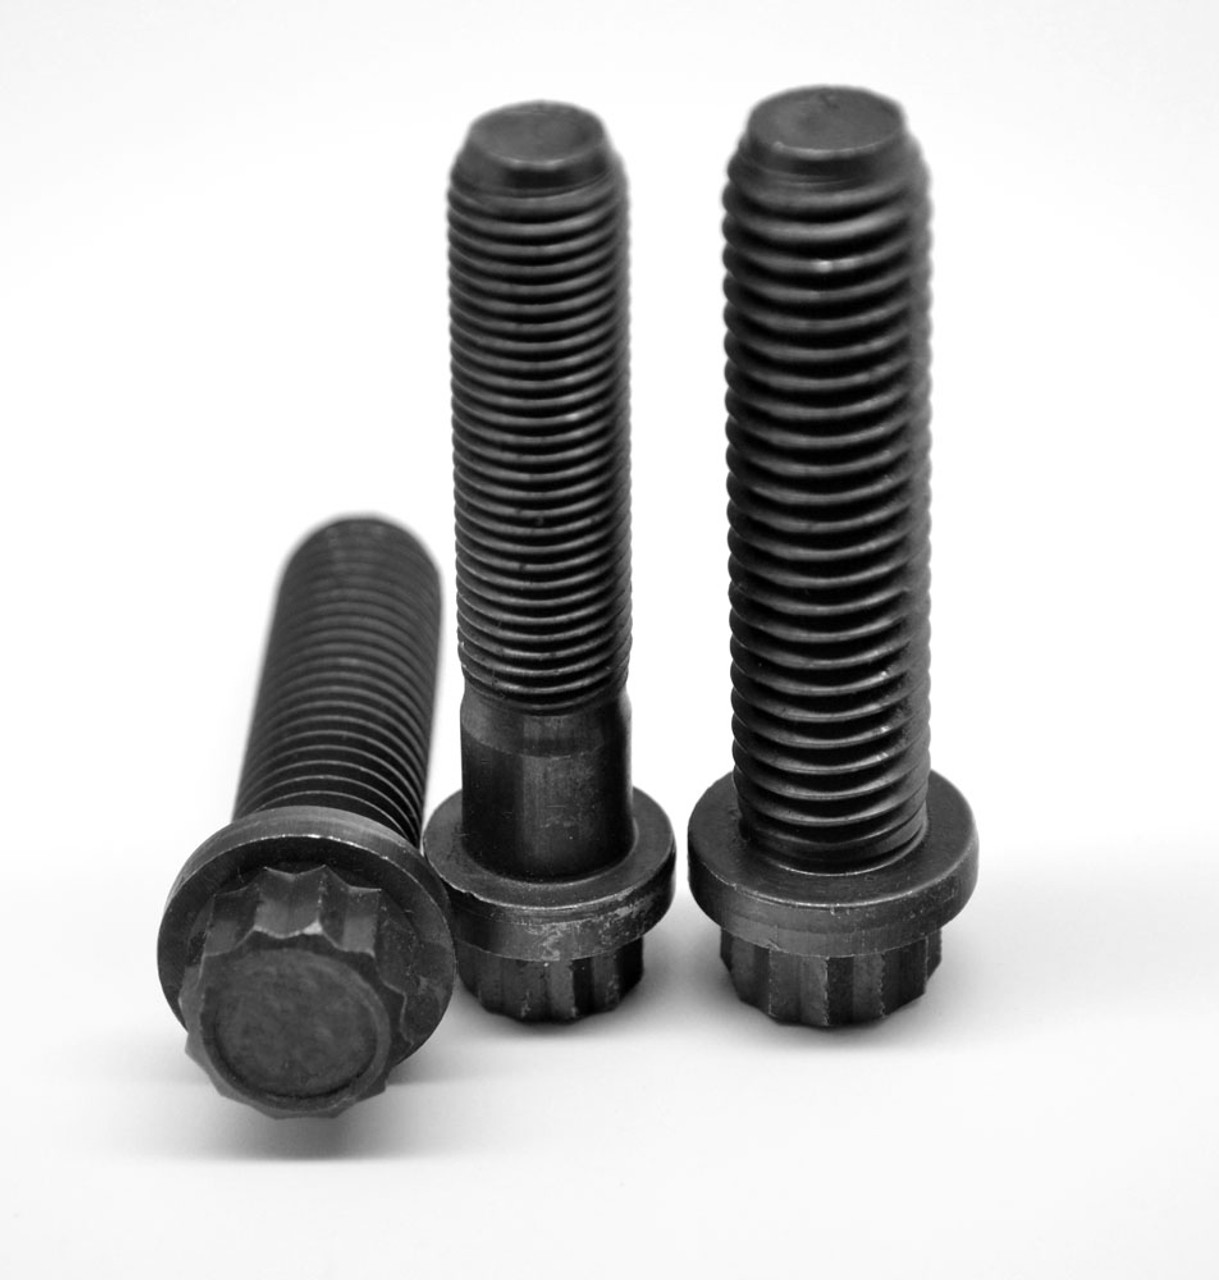 3/4-10 x 5 Coarse Thread 12-Point Flange Screw Alloy Steel Thermal Black Oxide